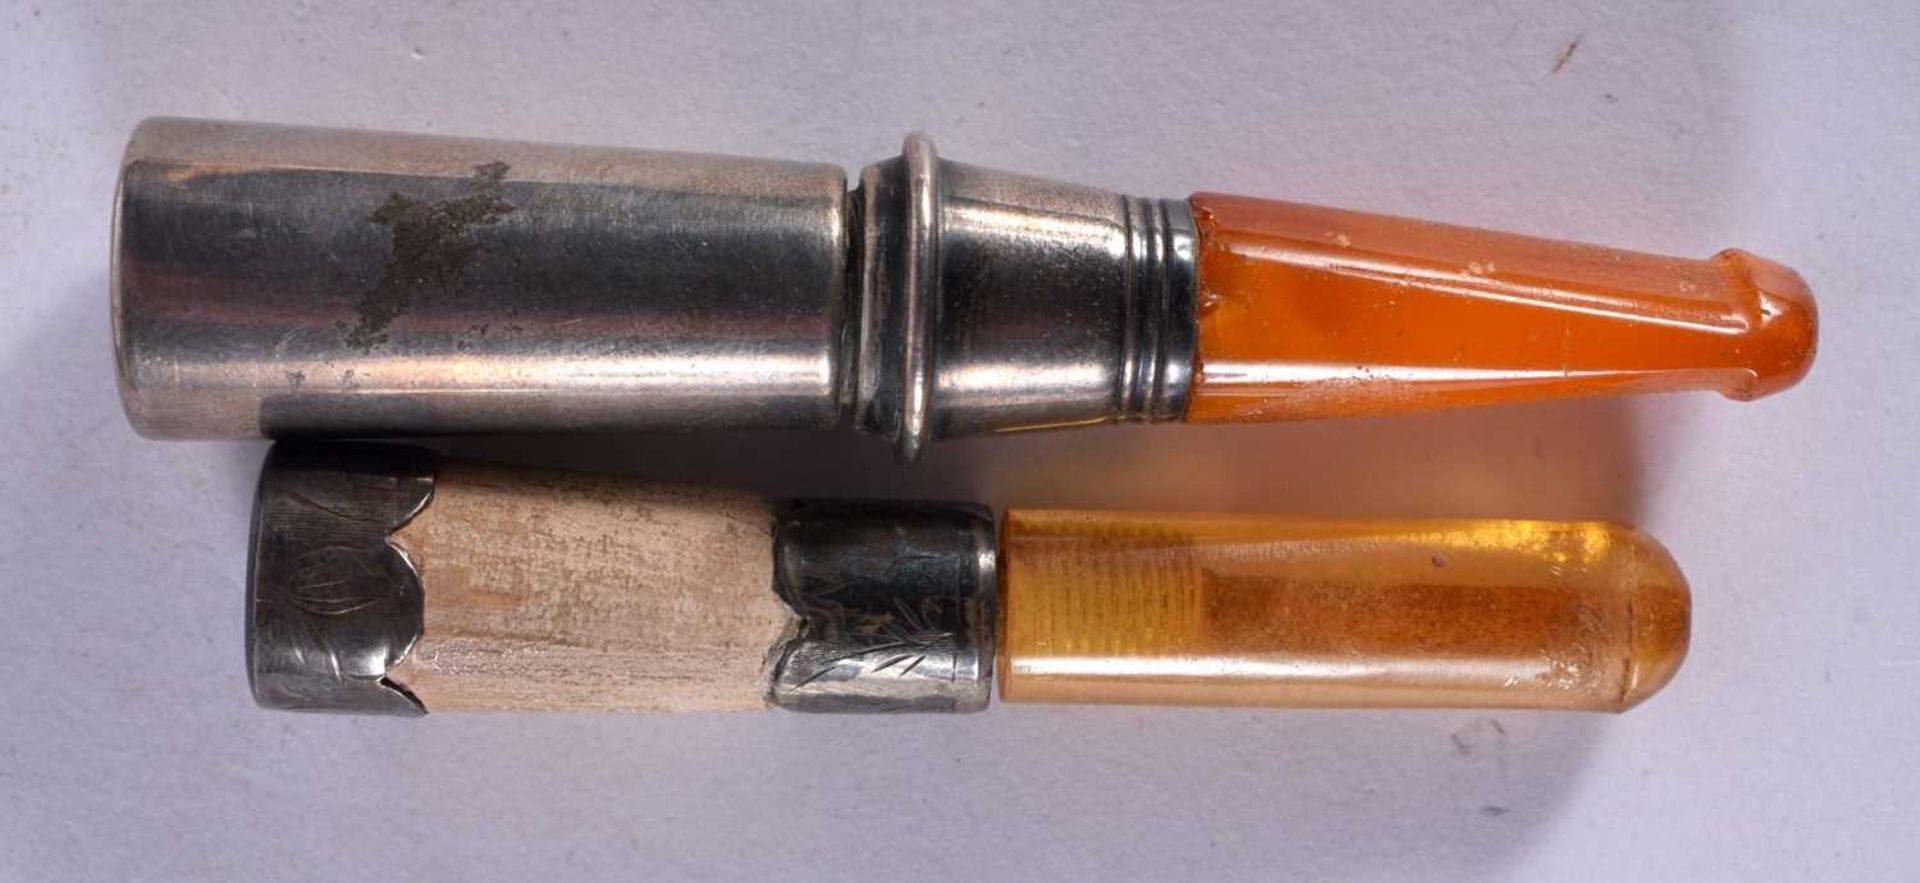 Five Cased Cheroot Holders with Amber Tips and Silver Mounts together with a Silver Cigar Punch (6). - Image 2 of 4